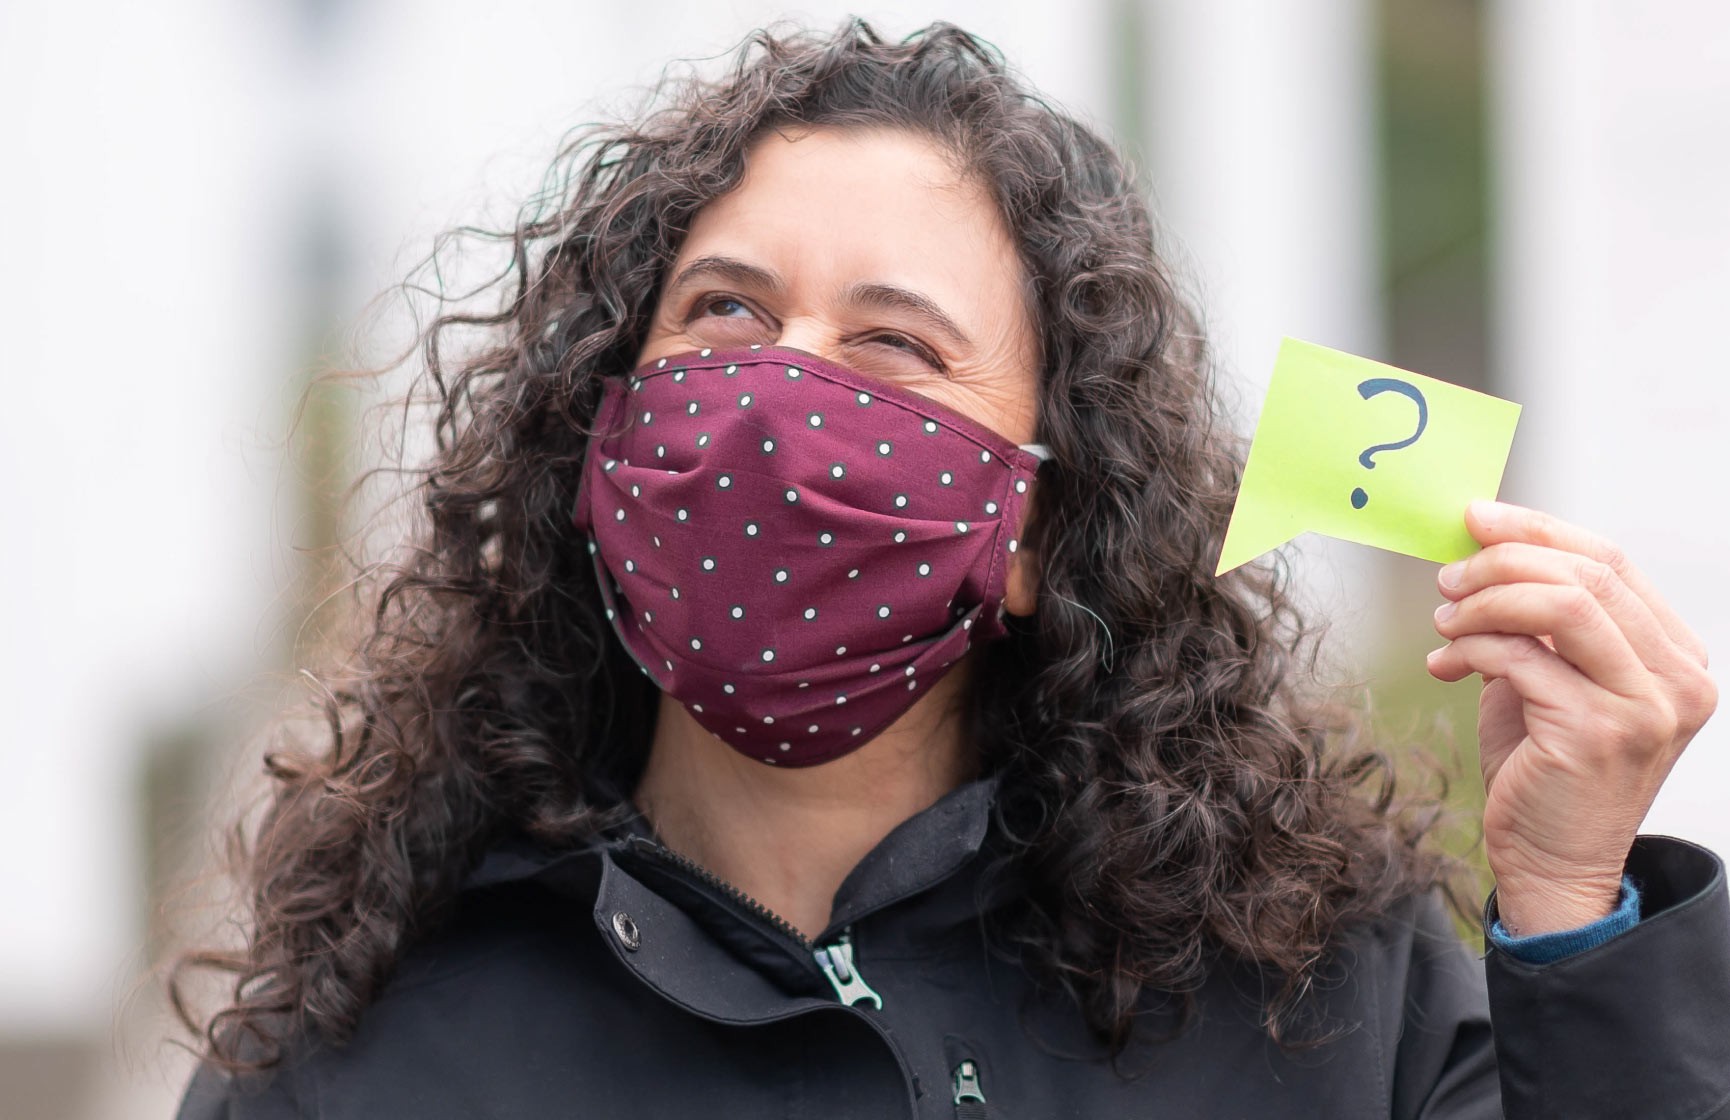 A person wearing a COVID-19 face mask holds up a sign with a question mark on it to indicate that they can't understand what people are saying